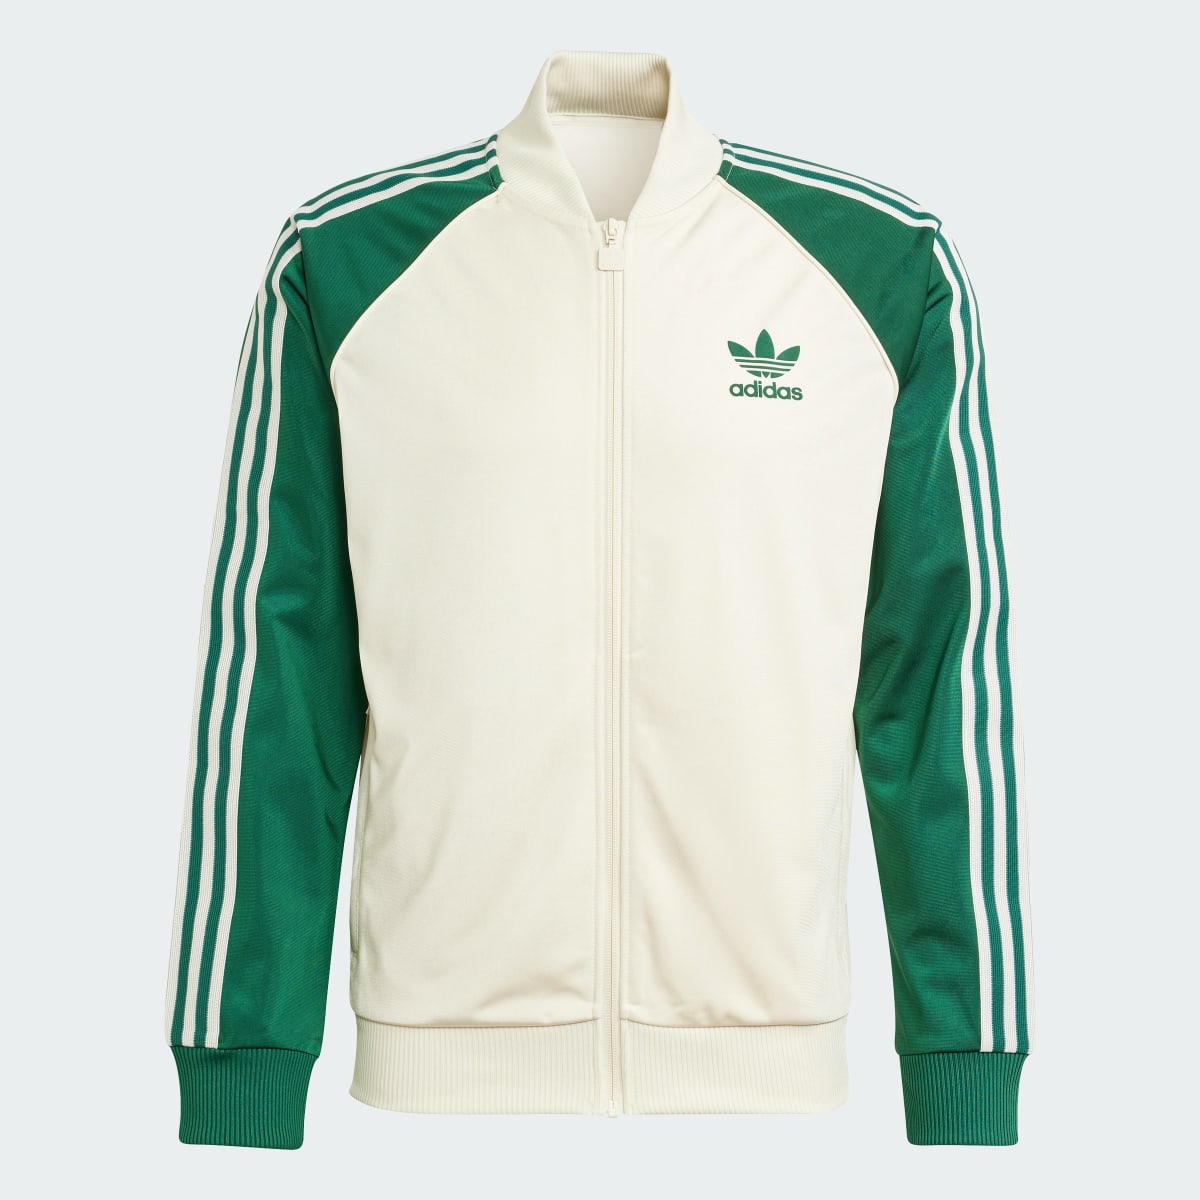 Adidas SST Track Top. 5